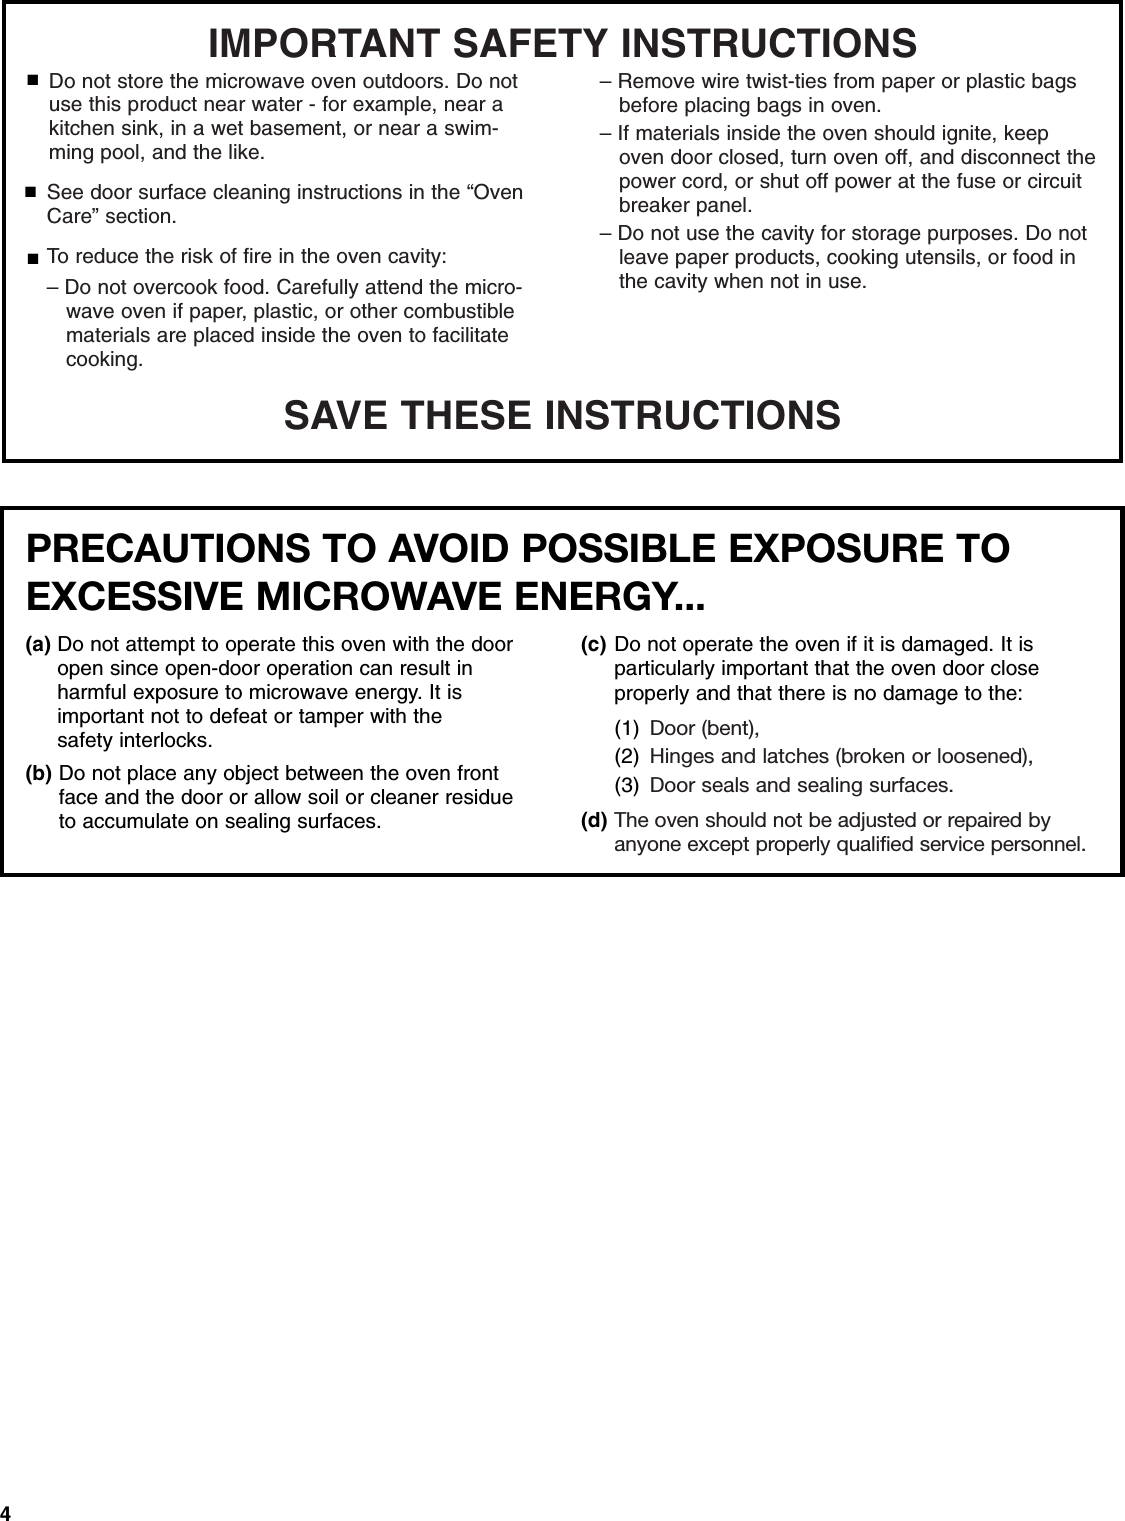 4SAVE THESE INSTRUCTIONSIMPORTANT SAFETY INSTRUCTIONSSee door surface cleaning instructions in the “Oven Care” section.To reduce the risk of fire in the oven cavity:– Do not overcook food. Carefully attend the micro-   wave oven if paper, plastic, or other combustible    materials are placed inside the oven to facilitate    cooking.■■■Do not store the microwave oven outdoors. Do not use this product near water - for example, near a kitchen sink, in a wet basement, or near a swim-ming pool, and the like.– Remove wire twist-ties from paper or plastic bags   before placing bags in oven.– If materials inside the oven should ignite, keep    oven door closed, turn oven off, and disconnect the    power cord, or shut off power at the fuse or circuit   breaker panel.– Do not use the cavity for storage purposes. Do not   leave paper products, cooking utensils, or food in    the cavity when not in use.PRECAUTIONS TO AVOID POSSIBLE EXPOSURE TO EXCESSIVE MICROWAVE ENERGY... (a) Do not attempt to operate this oven with the door open since open-door operation can result in harmful exposure to microwave energy. It isimportant not to defeat or tamper with the safety interlocks.(b) Do not place any object between the oven front face and the door or allow soil or cleaner residue to accumulate on sealing surfaces.(c) Do not operate the oven if it is damaged. It is particularly important that the oven door close properly and that there is no damage to the: (1) Door (bent),(2) Hinges and latches (broken or loosened), (3) Door seals and sealing surfaces.(d) The oven should not be adjusted or repaired by anyone except properly qualified service personnel.